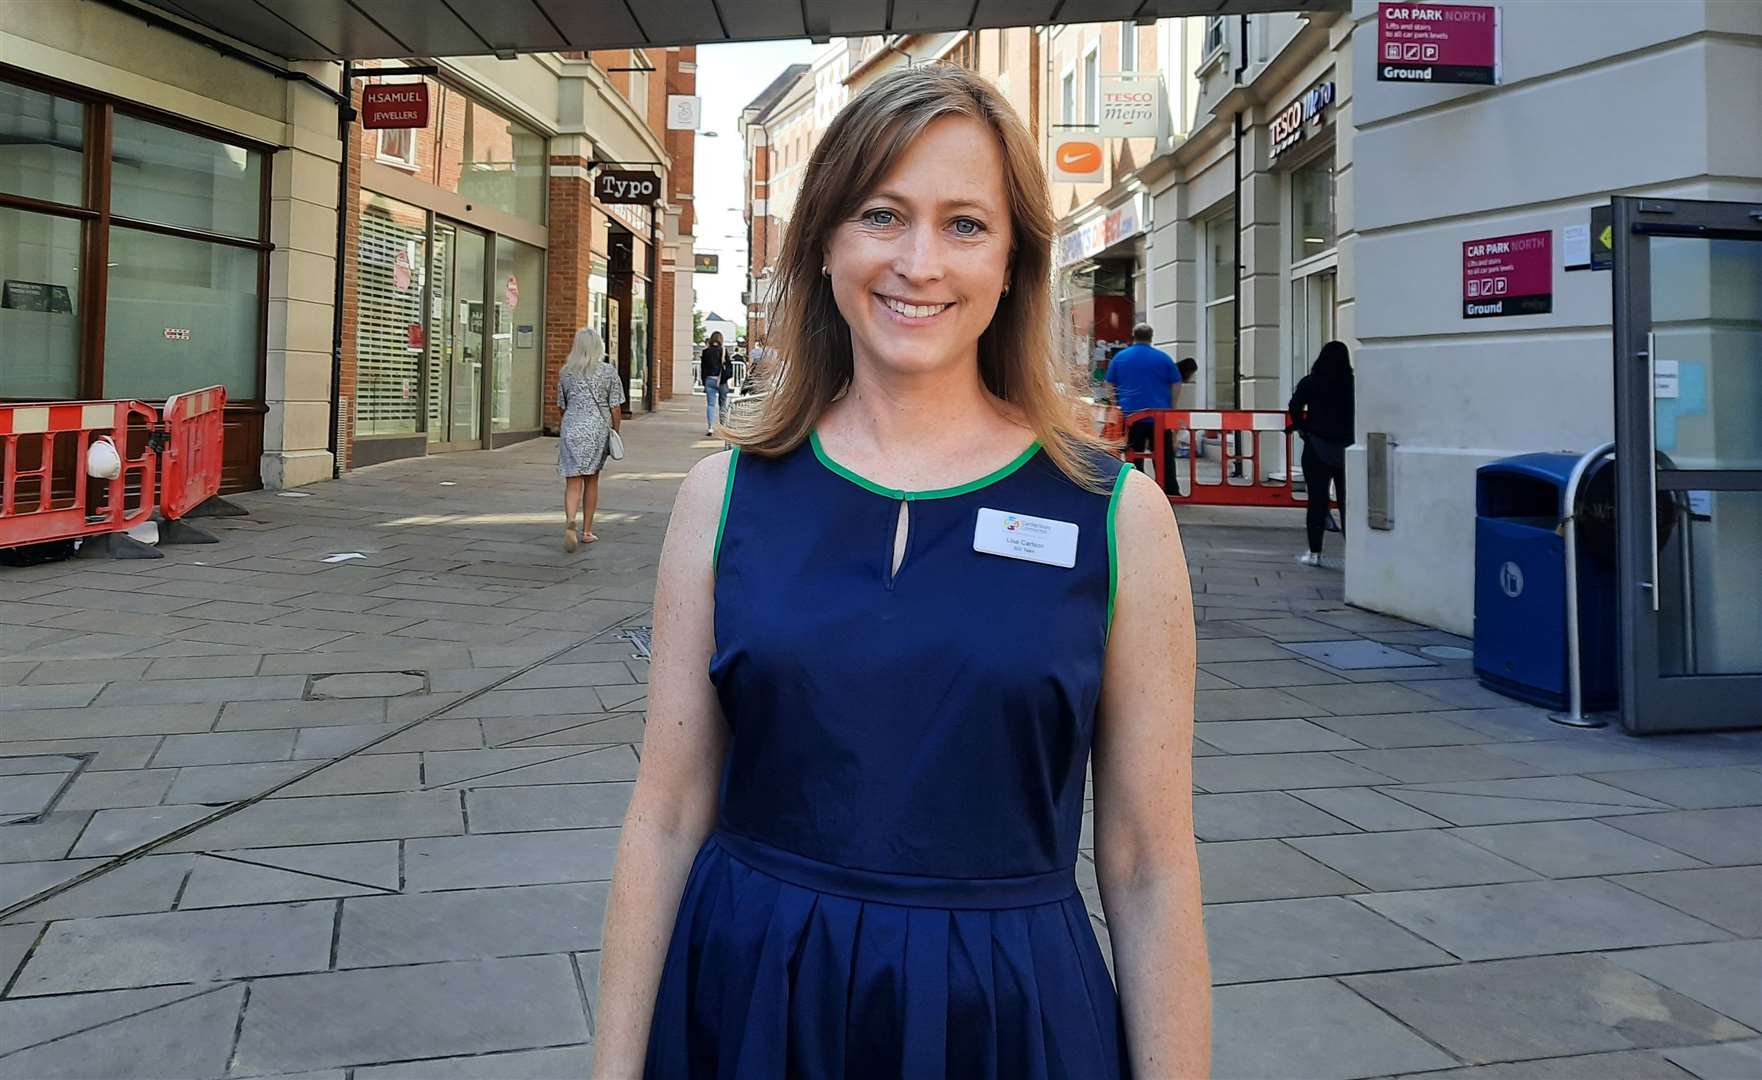 Canterbury Bid boss Lisa Carlson says the changes are a positive for the city